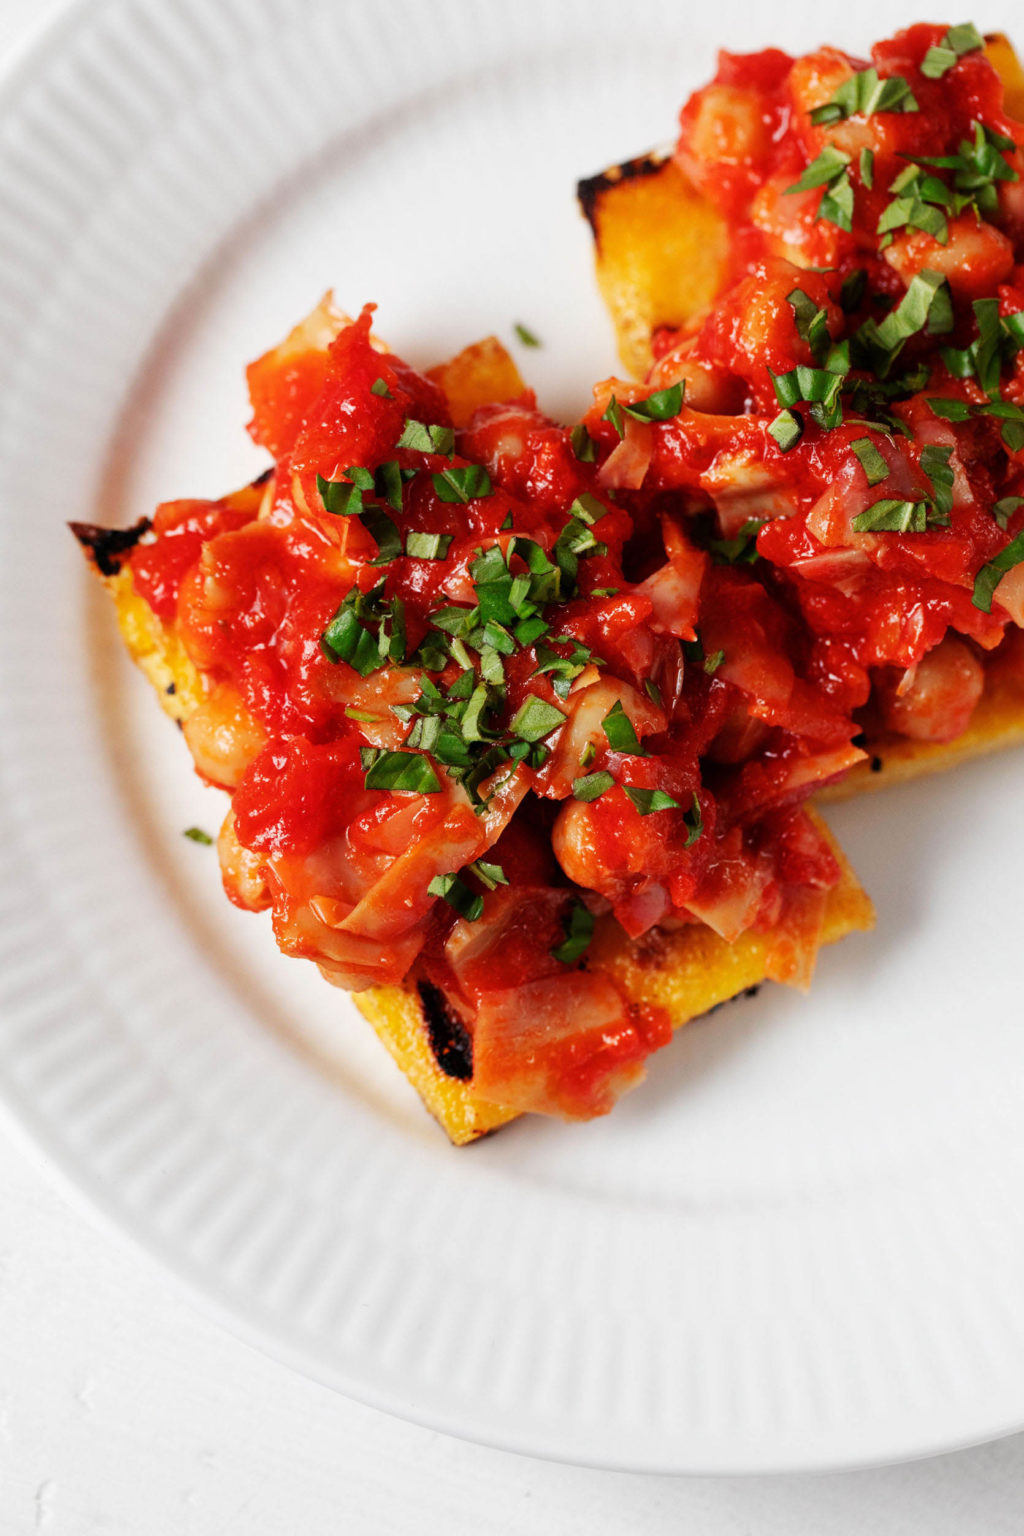 A saucy mixture of beans, vegetables, and tomatoes is piled on top of pieces of grilled polenta. They rest on a white plate on a white surface.